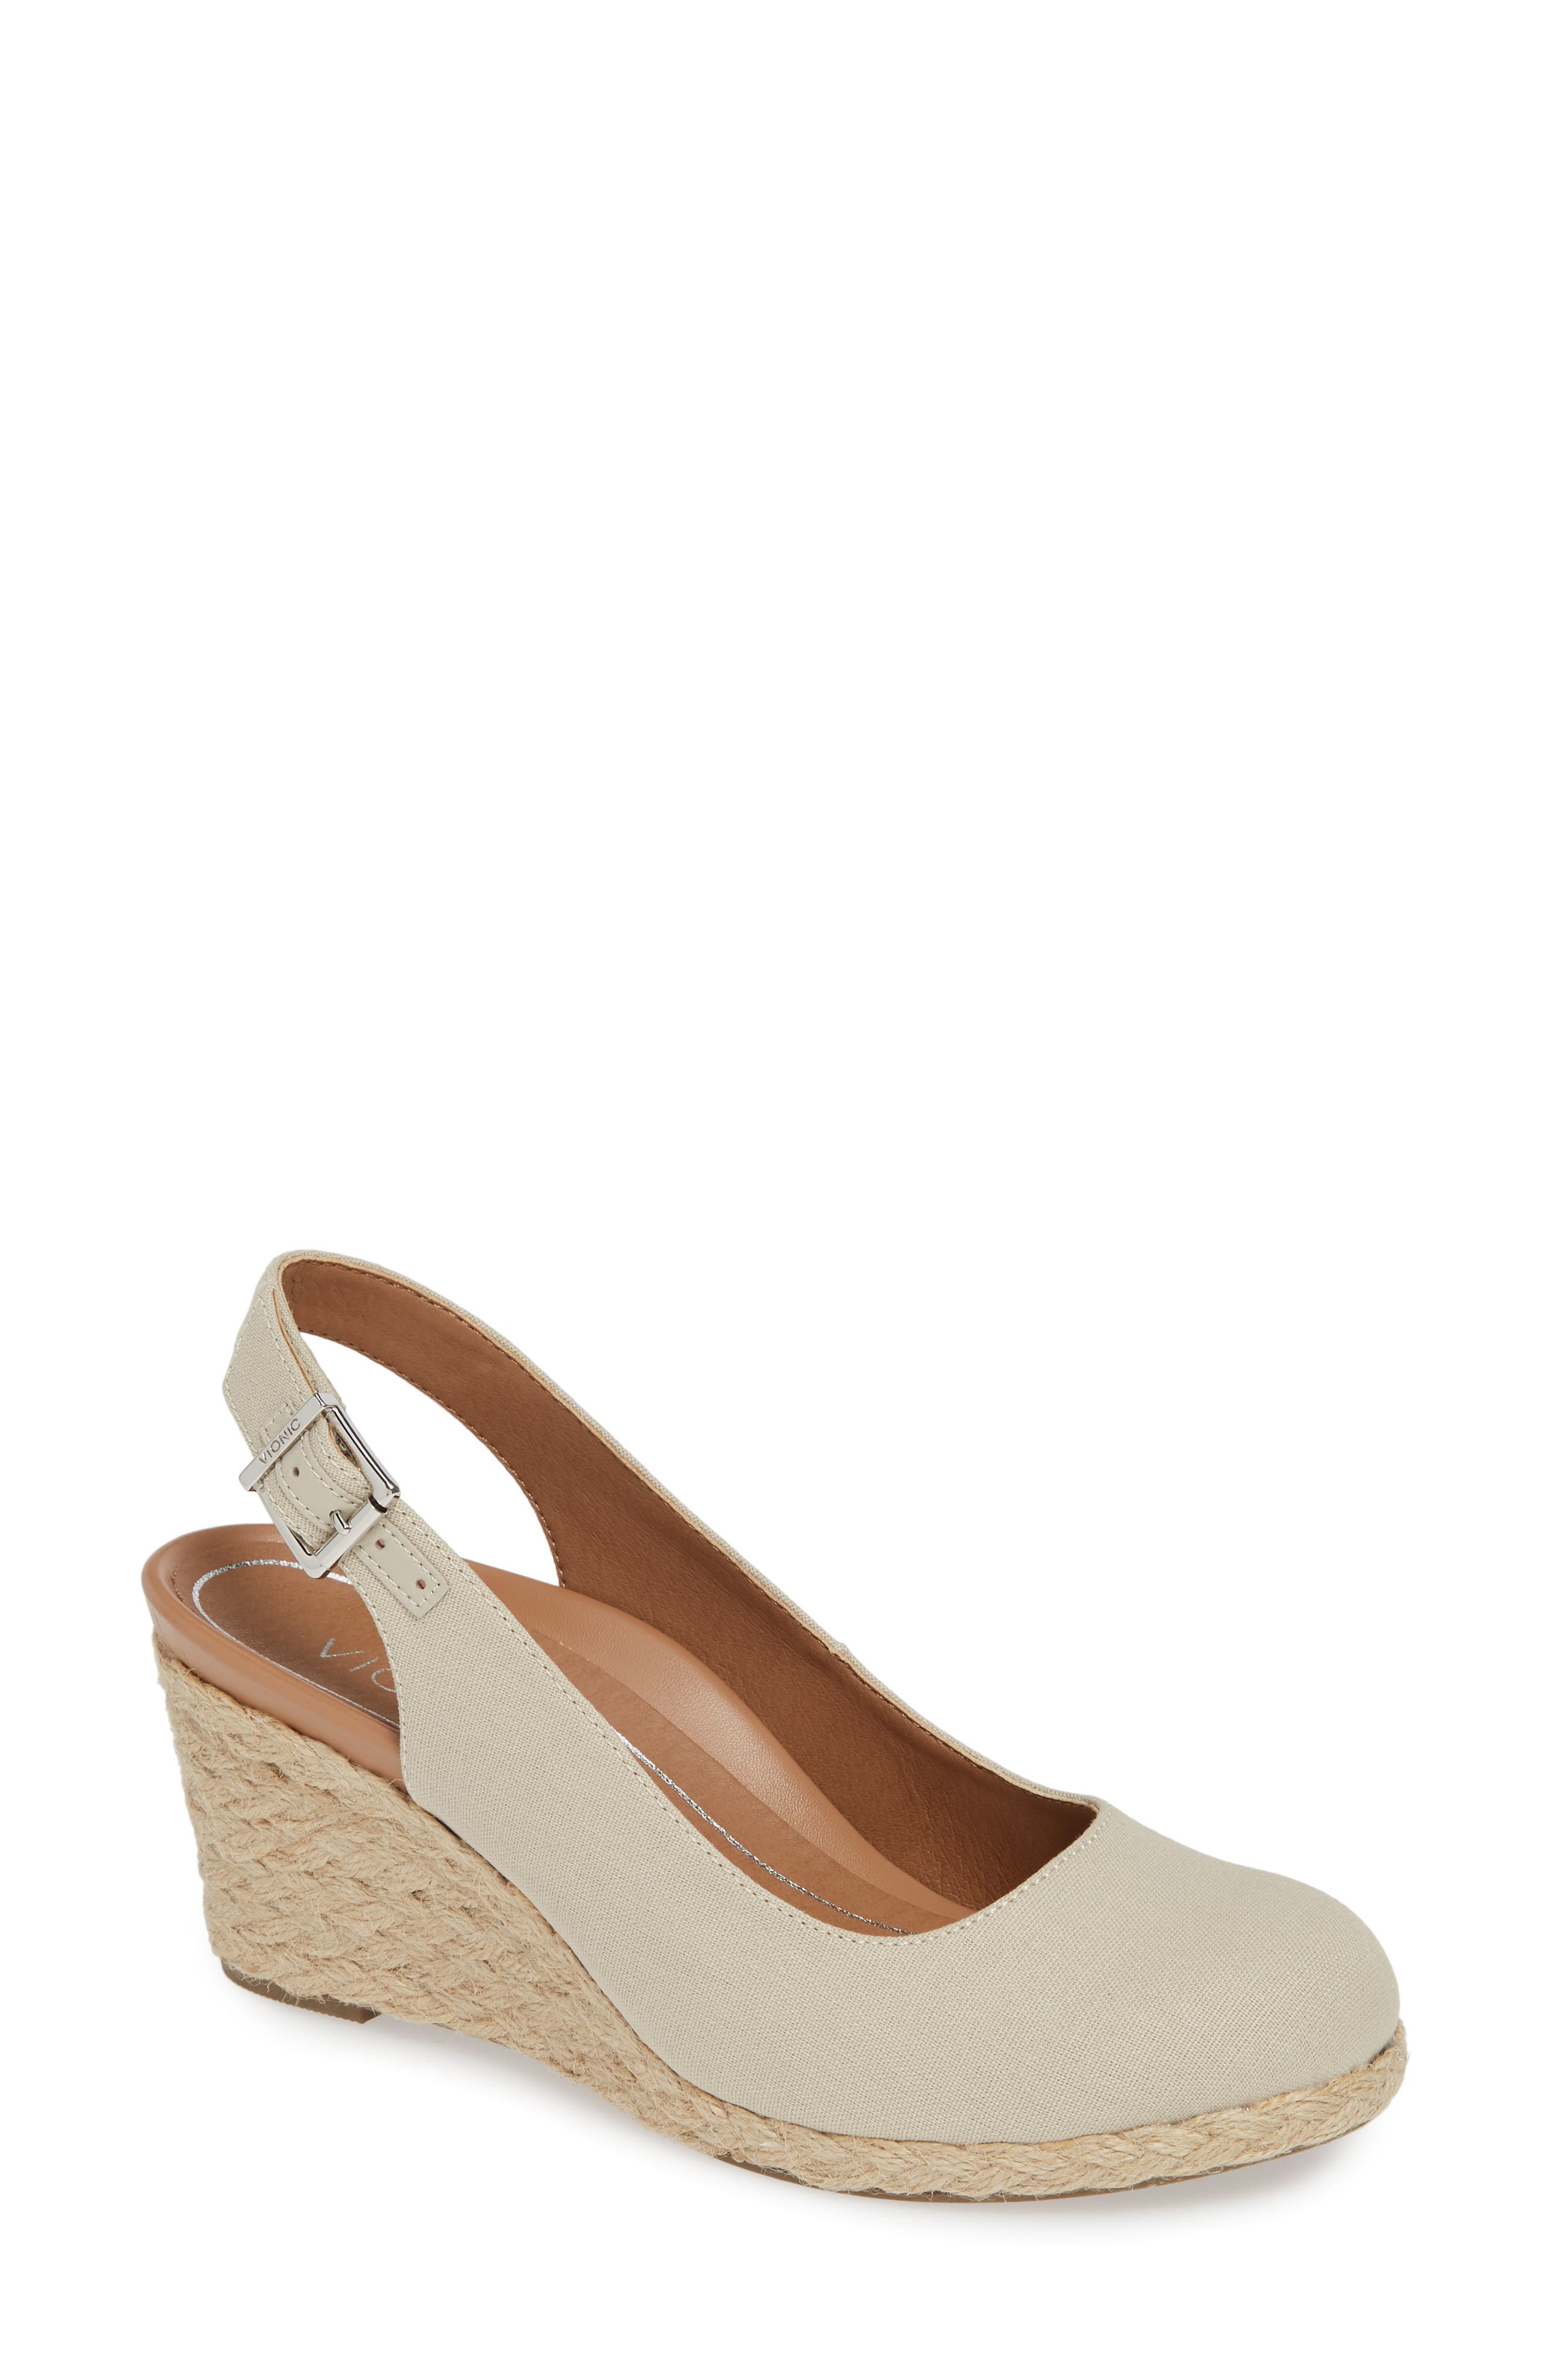 wide womens shoes nordstrom